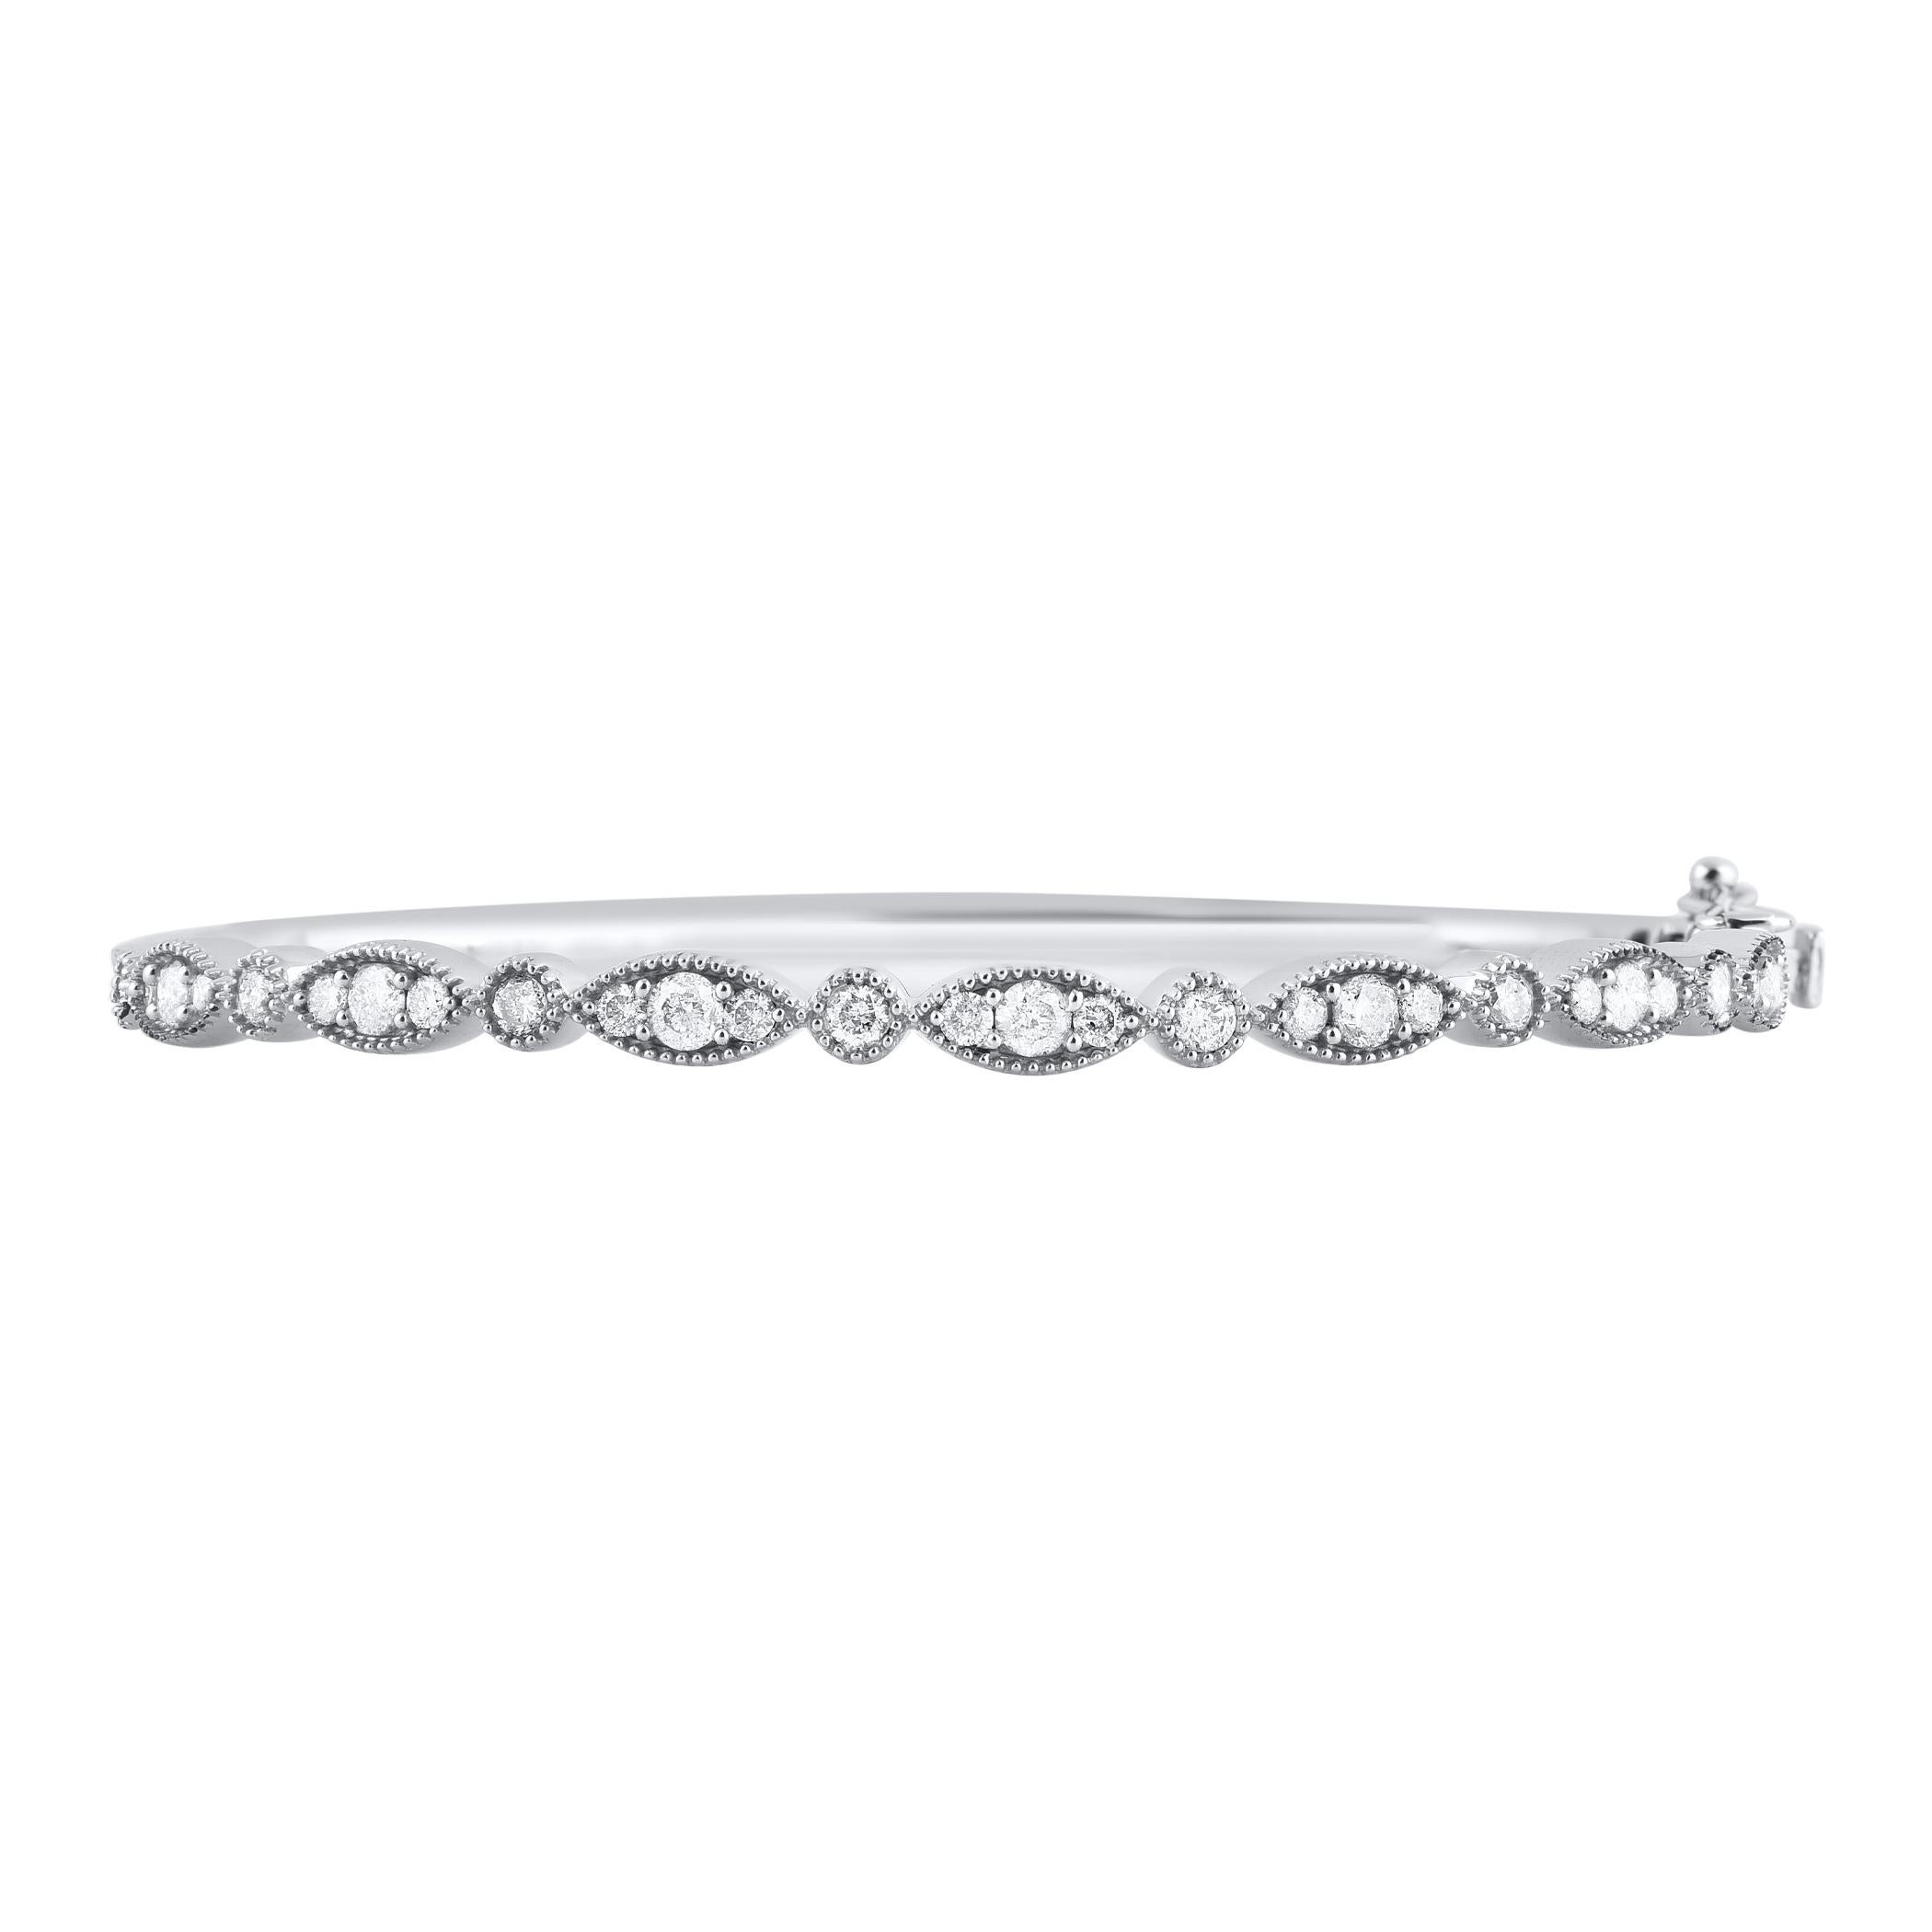 Enhance your everyday look with this diamond bangle bracelet. This Shimmering bangle bracelet features 29 natural round brilliant cut diamonds in prong and bezel setting and crafted in 14kt white gold. Diamonds are graded H-I color, I2 clarity. 

